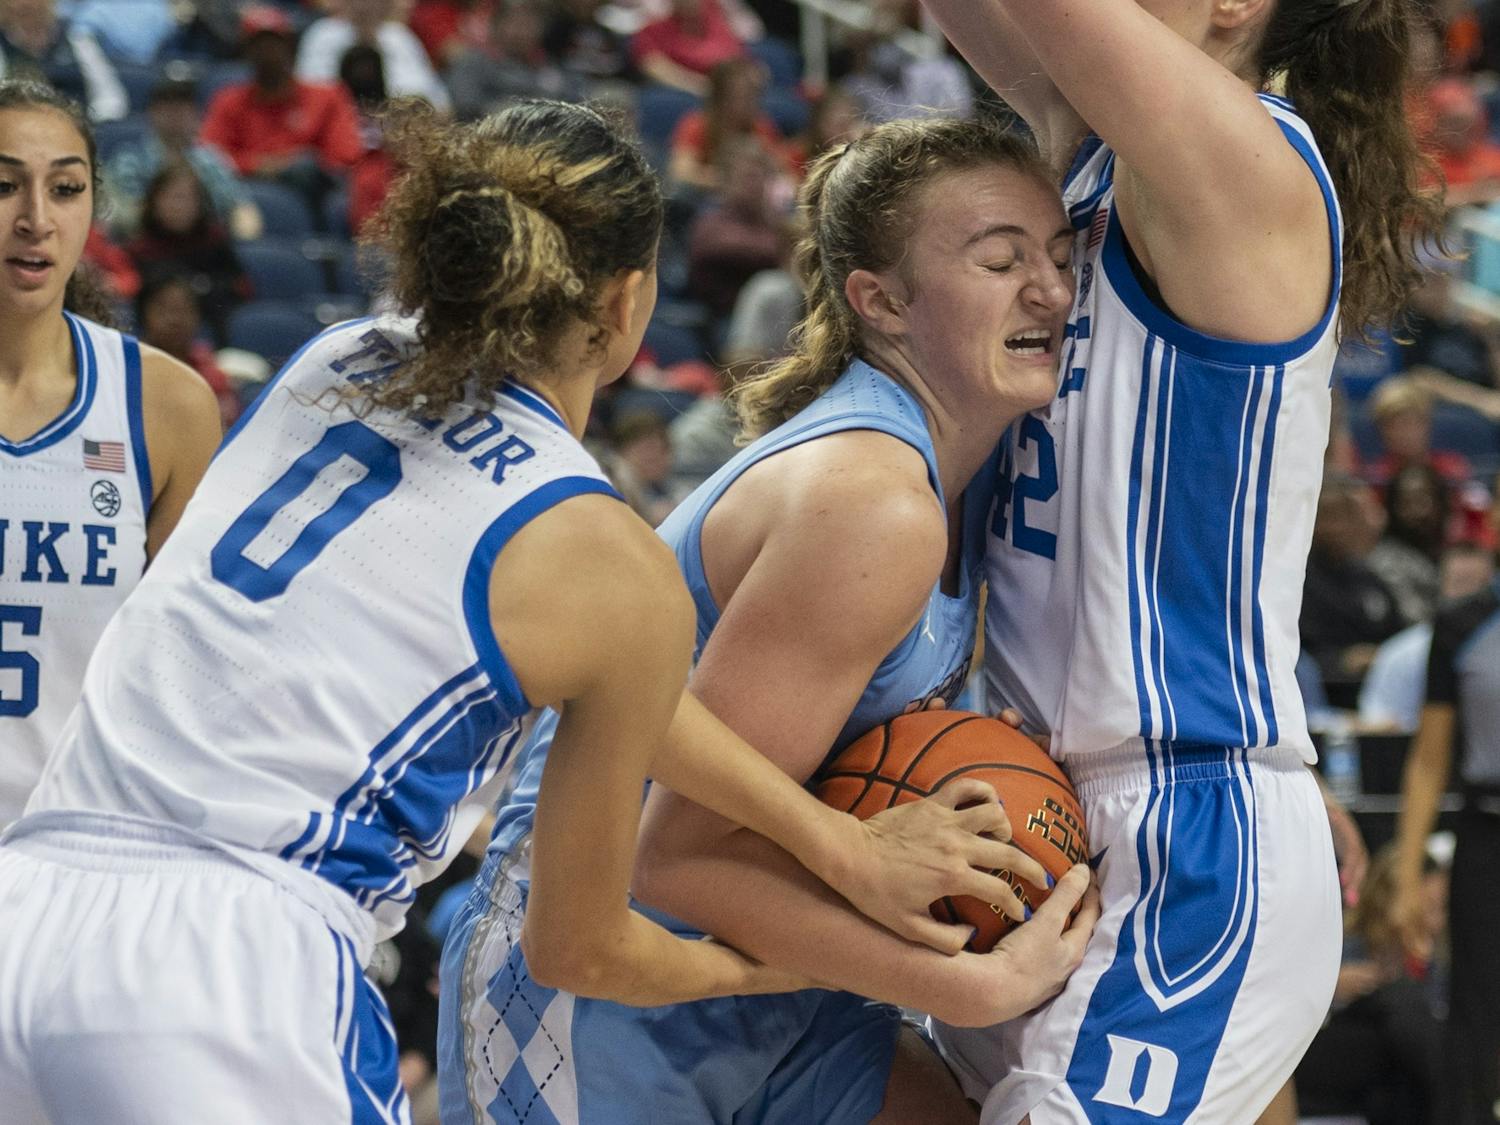 UNC junior guard Alyssa Ustby (1) tries to maintain possession of the ball during the women’s basketball game in the third round of the ACC tournament in Greensboro, N.C., on Friday, March 3, 2023. UNC fell to Duke 40-44.